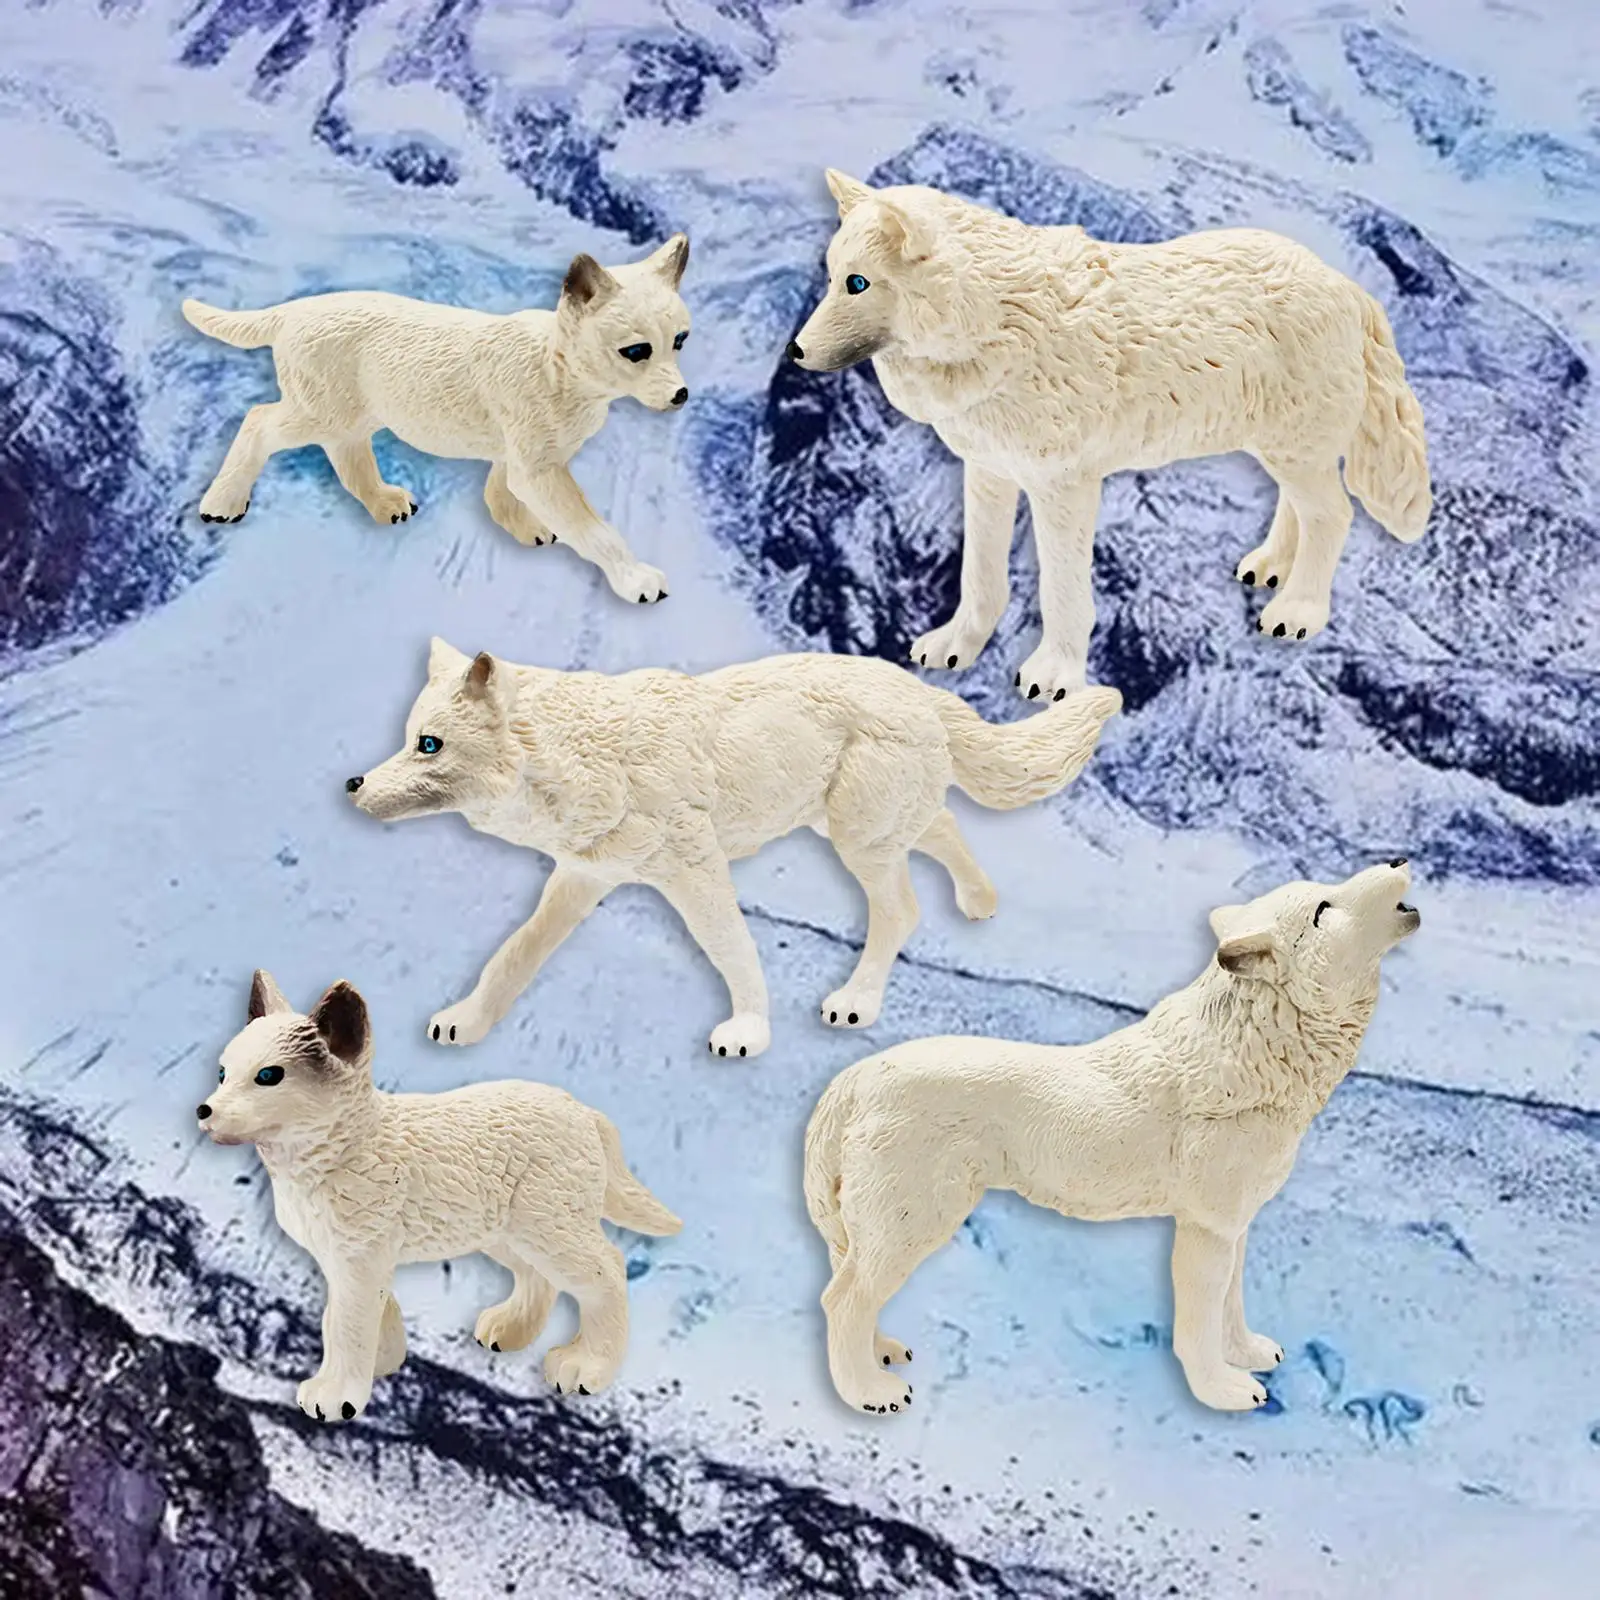 5 Pieces Wolf Figurines Wolf Playset Model for Desktop Decor Birthday Gifts